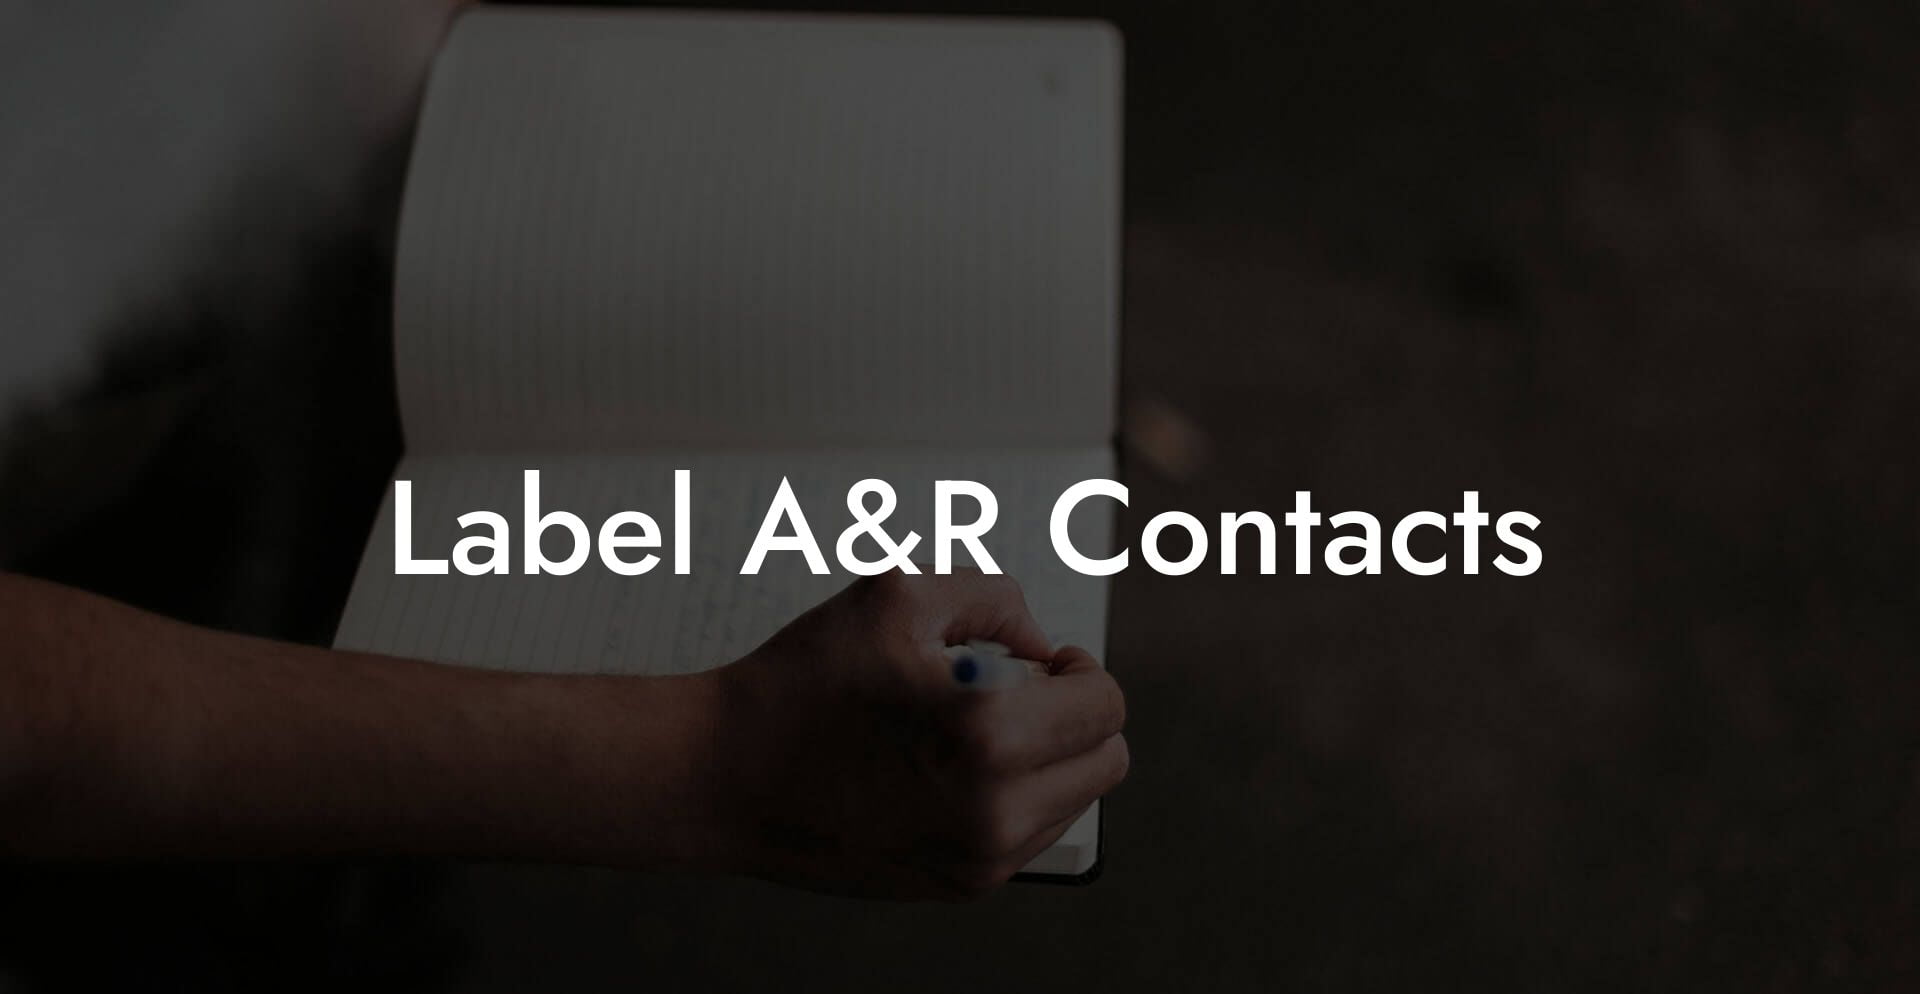 Label A&R Contacts